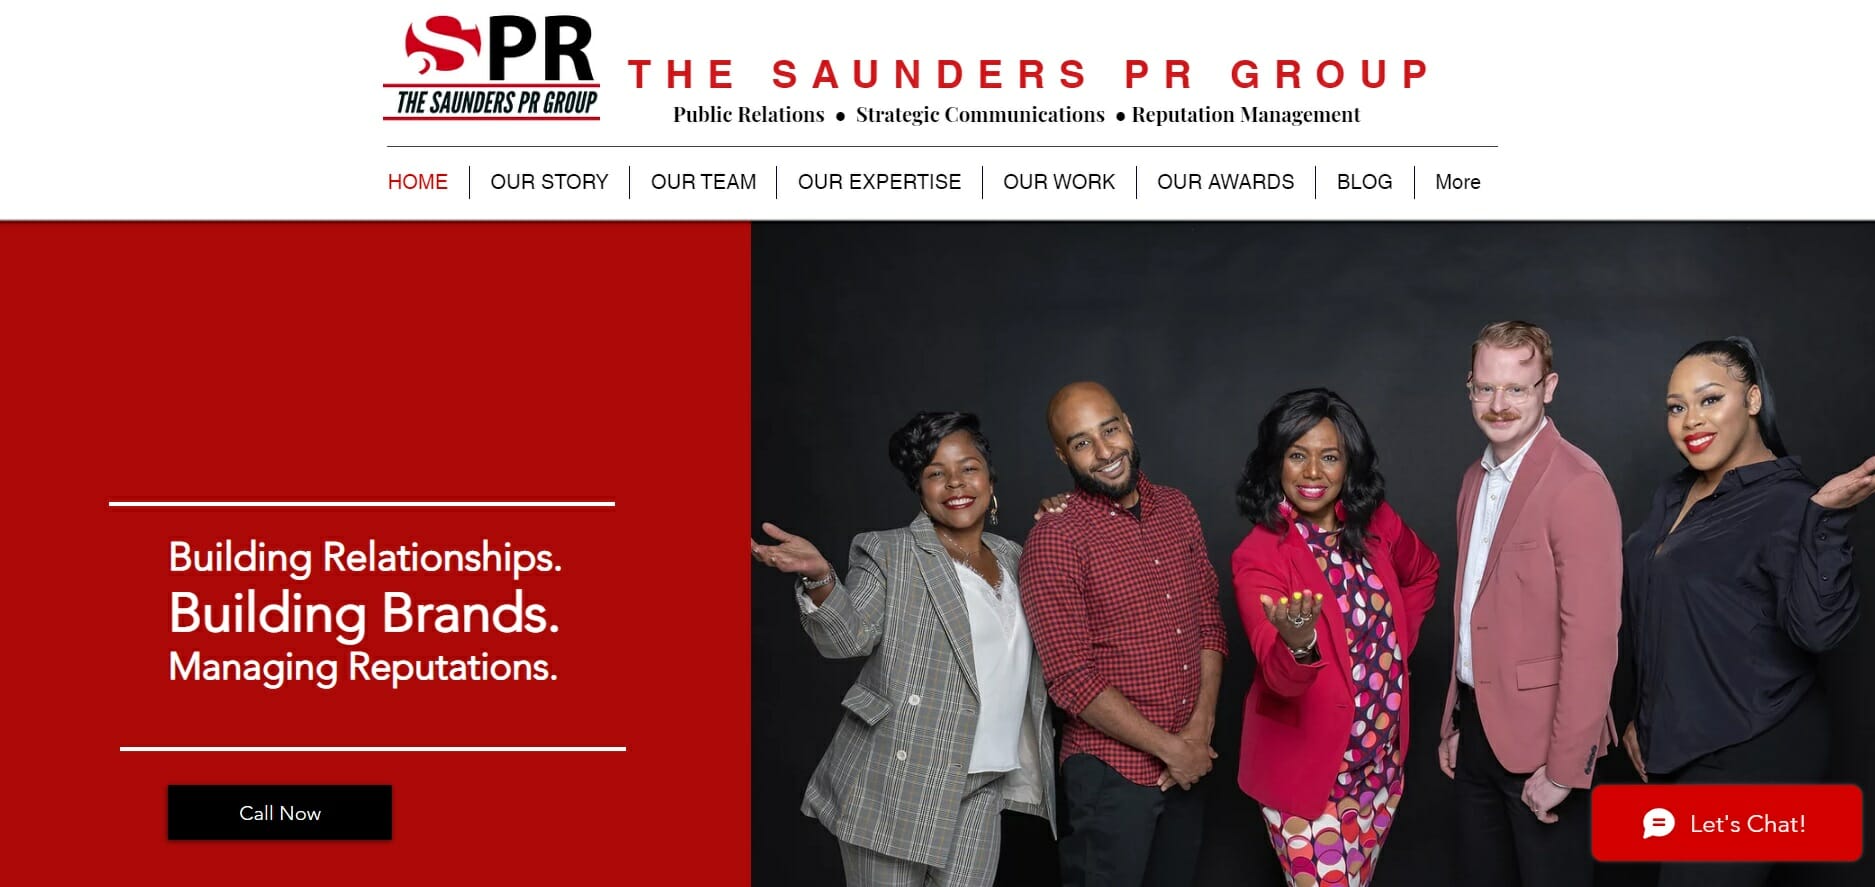 The Saunders PR Group